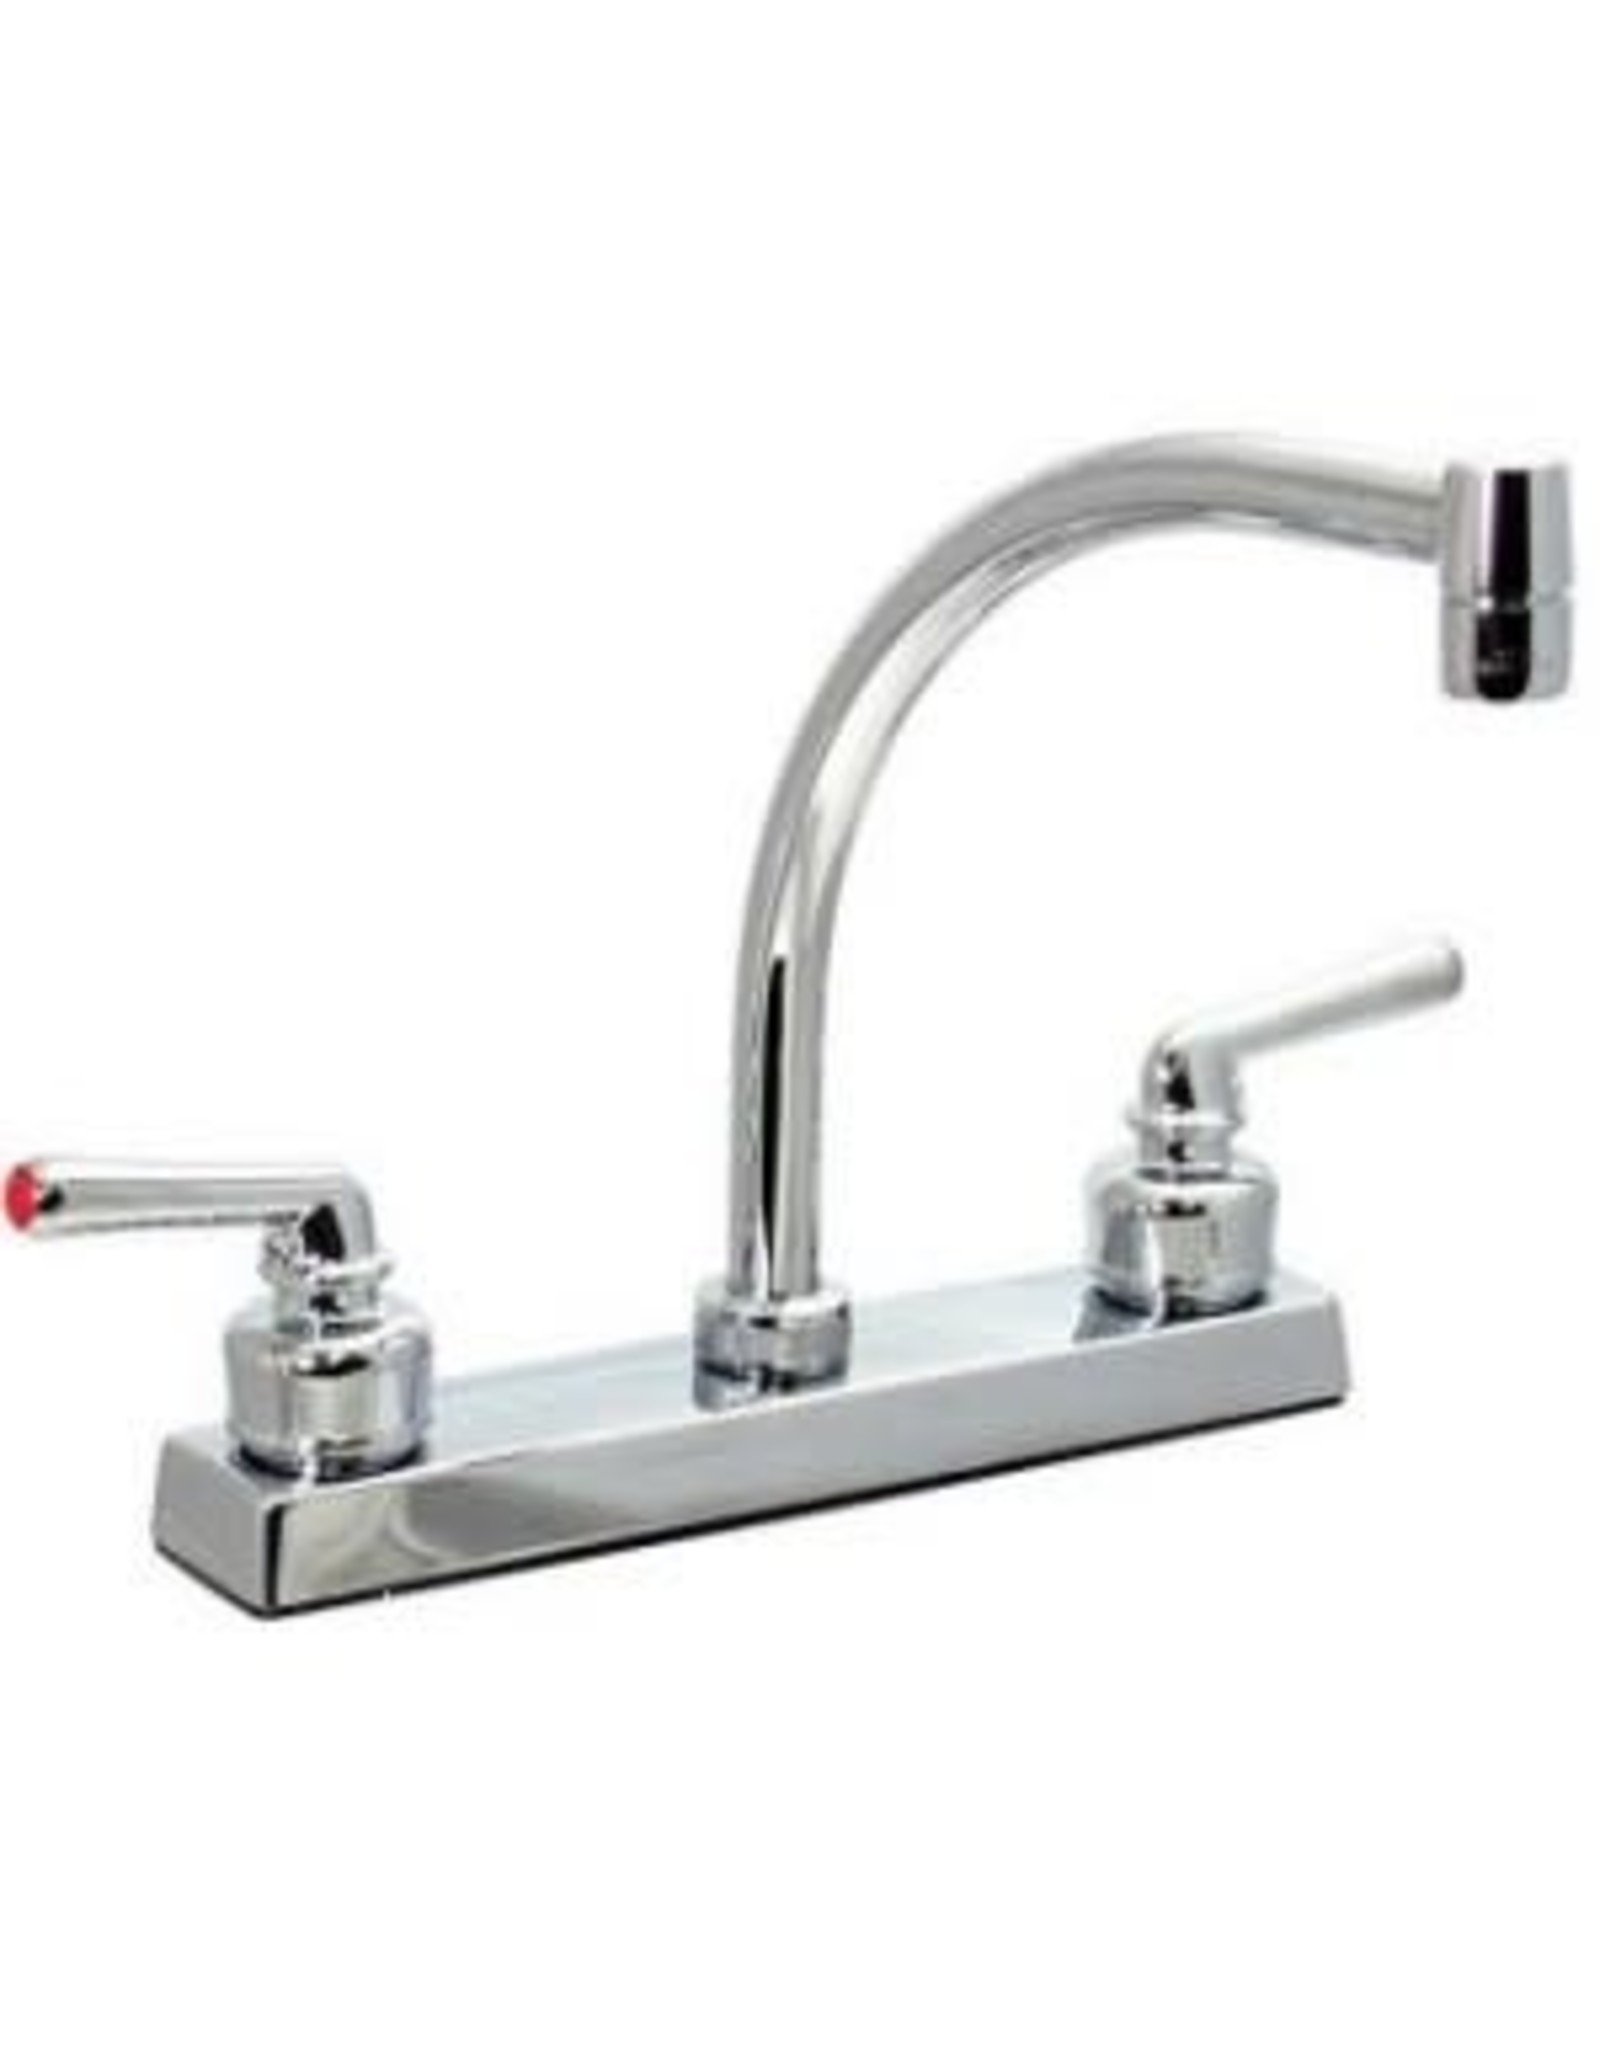 PH Faucet 8in Chrome Teacup Handle